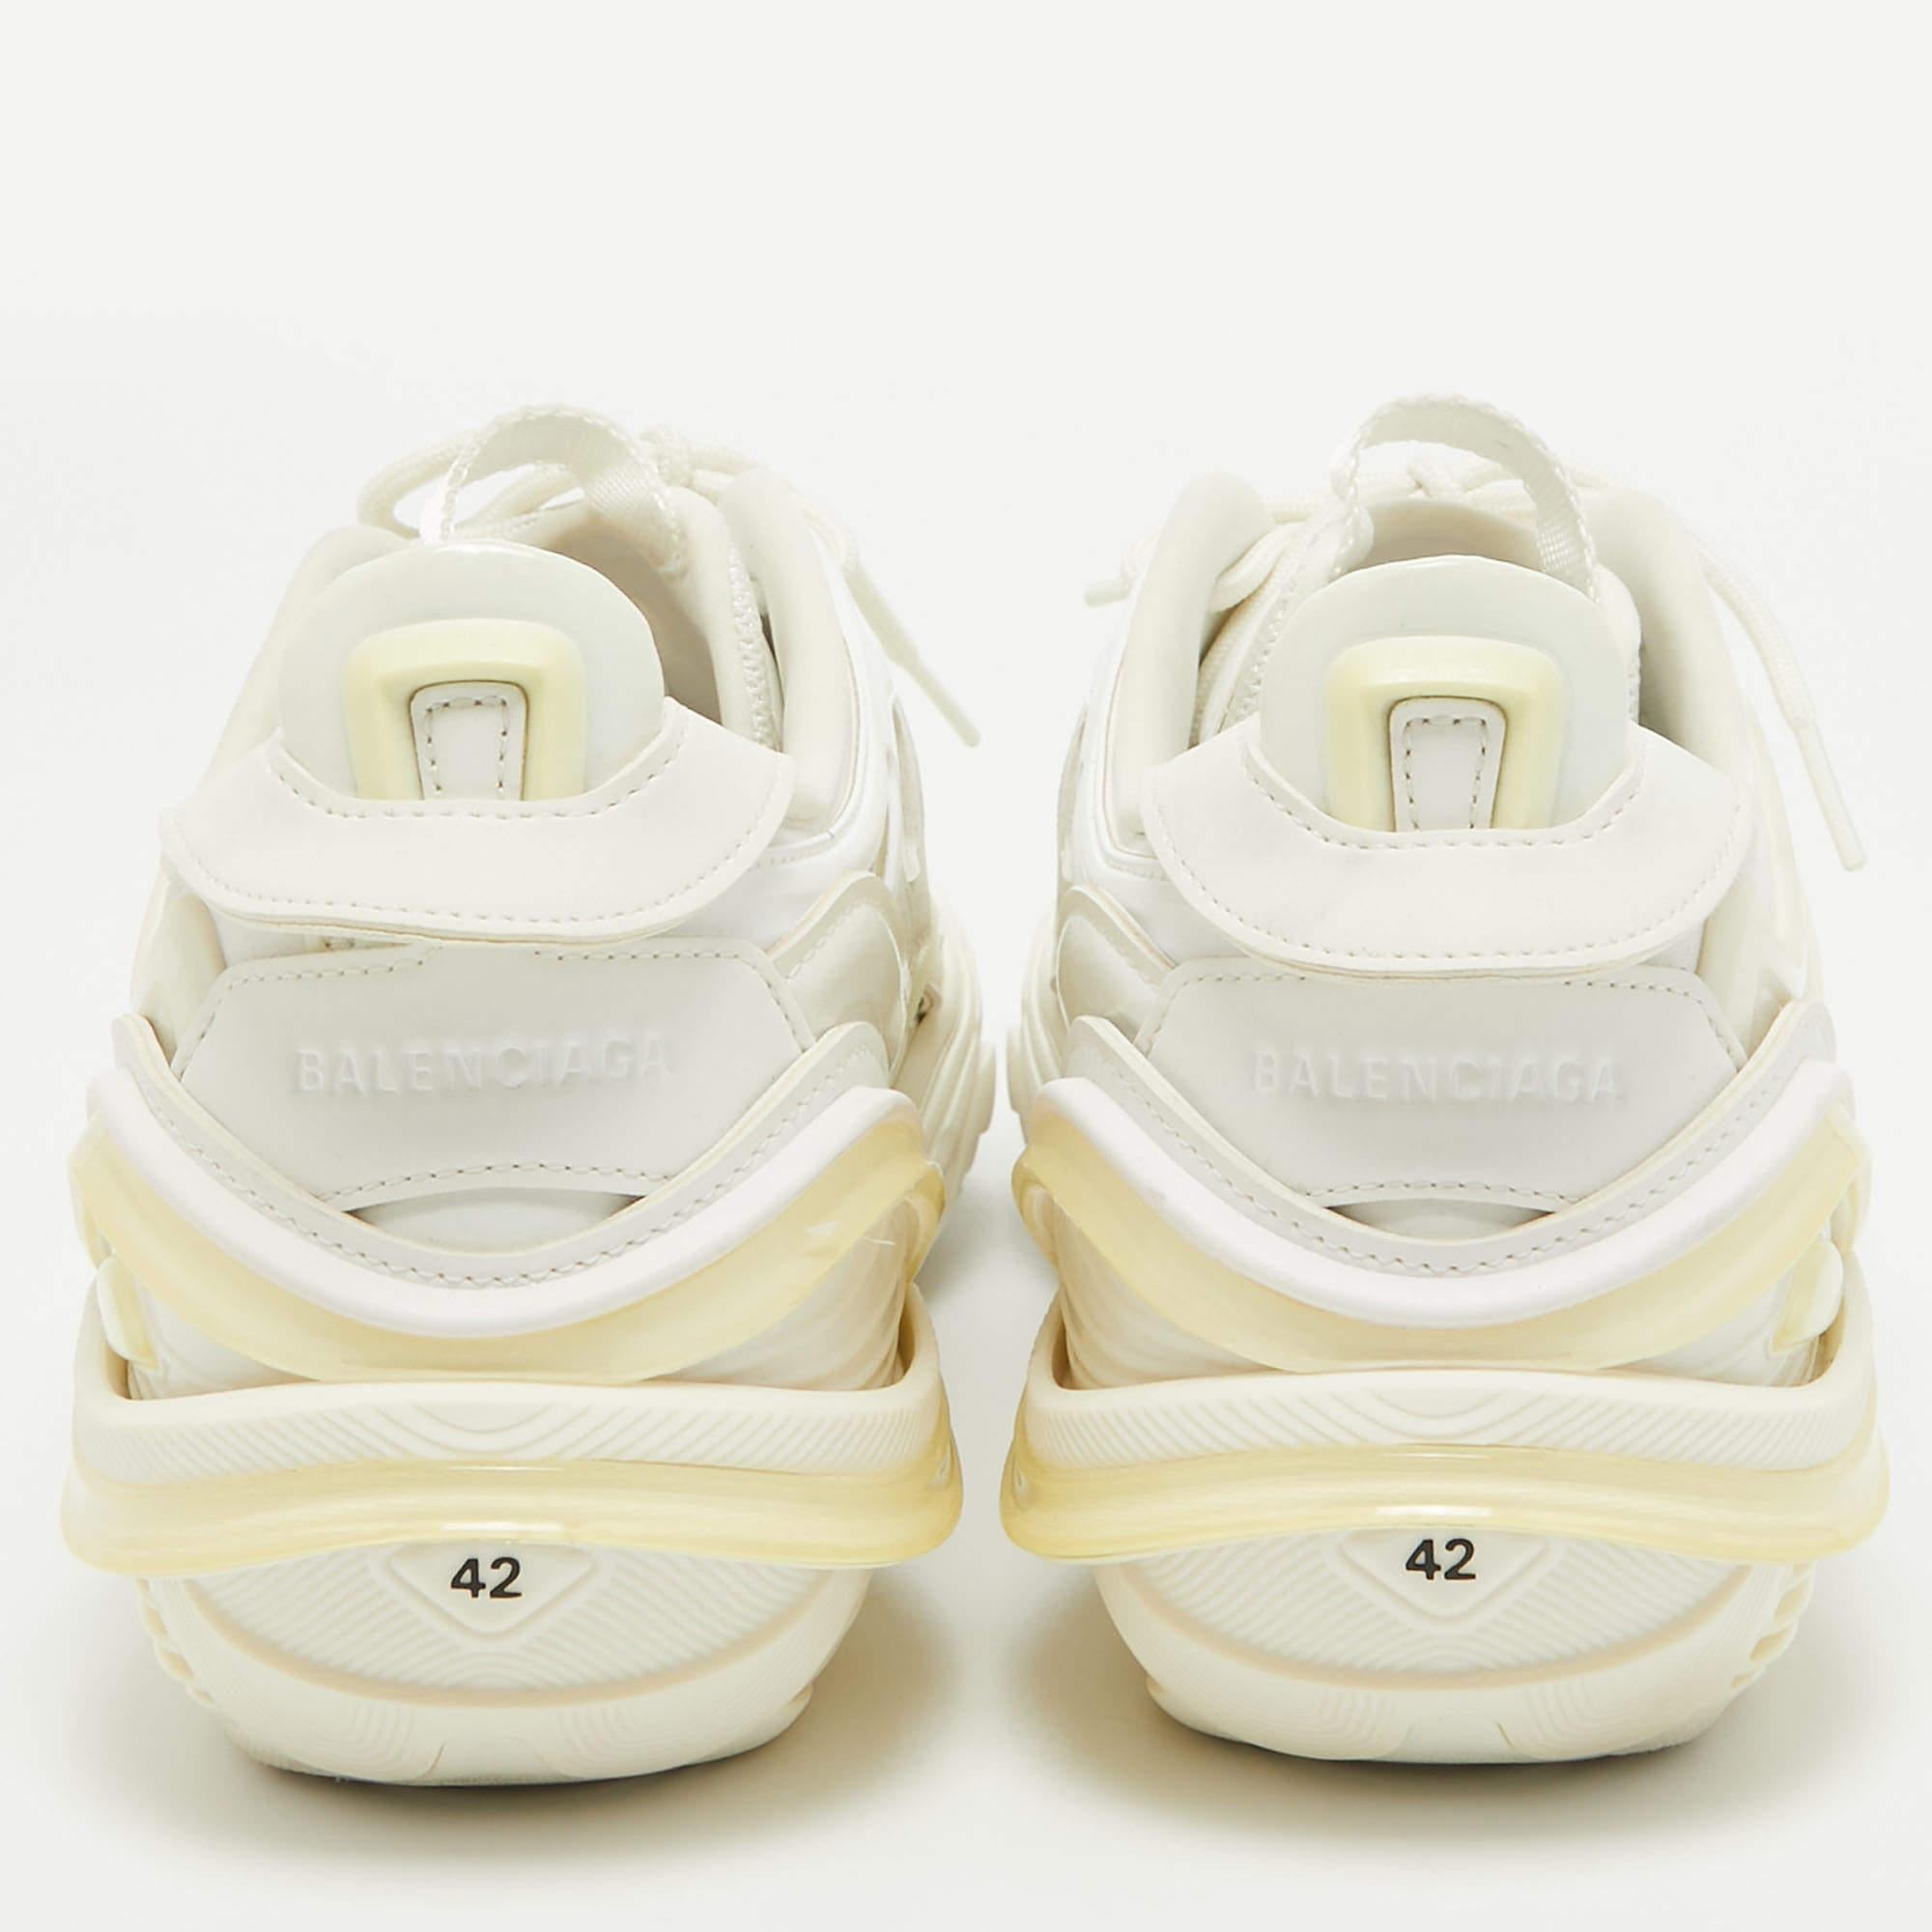 Men's Balenciaga White Rubber and Mesh Tyrex Sneakers Size 42 For Sale